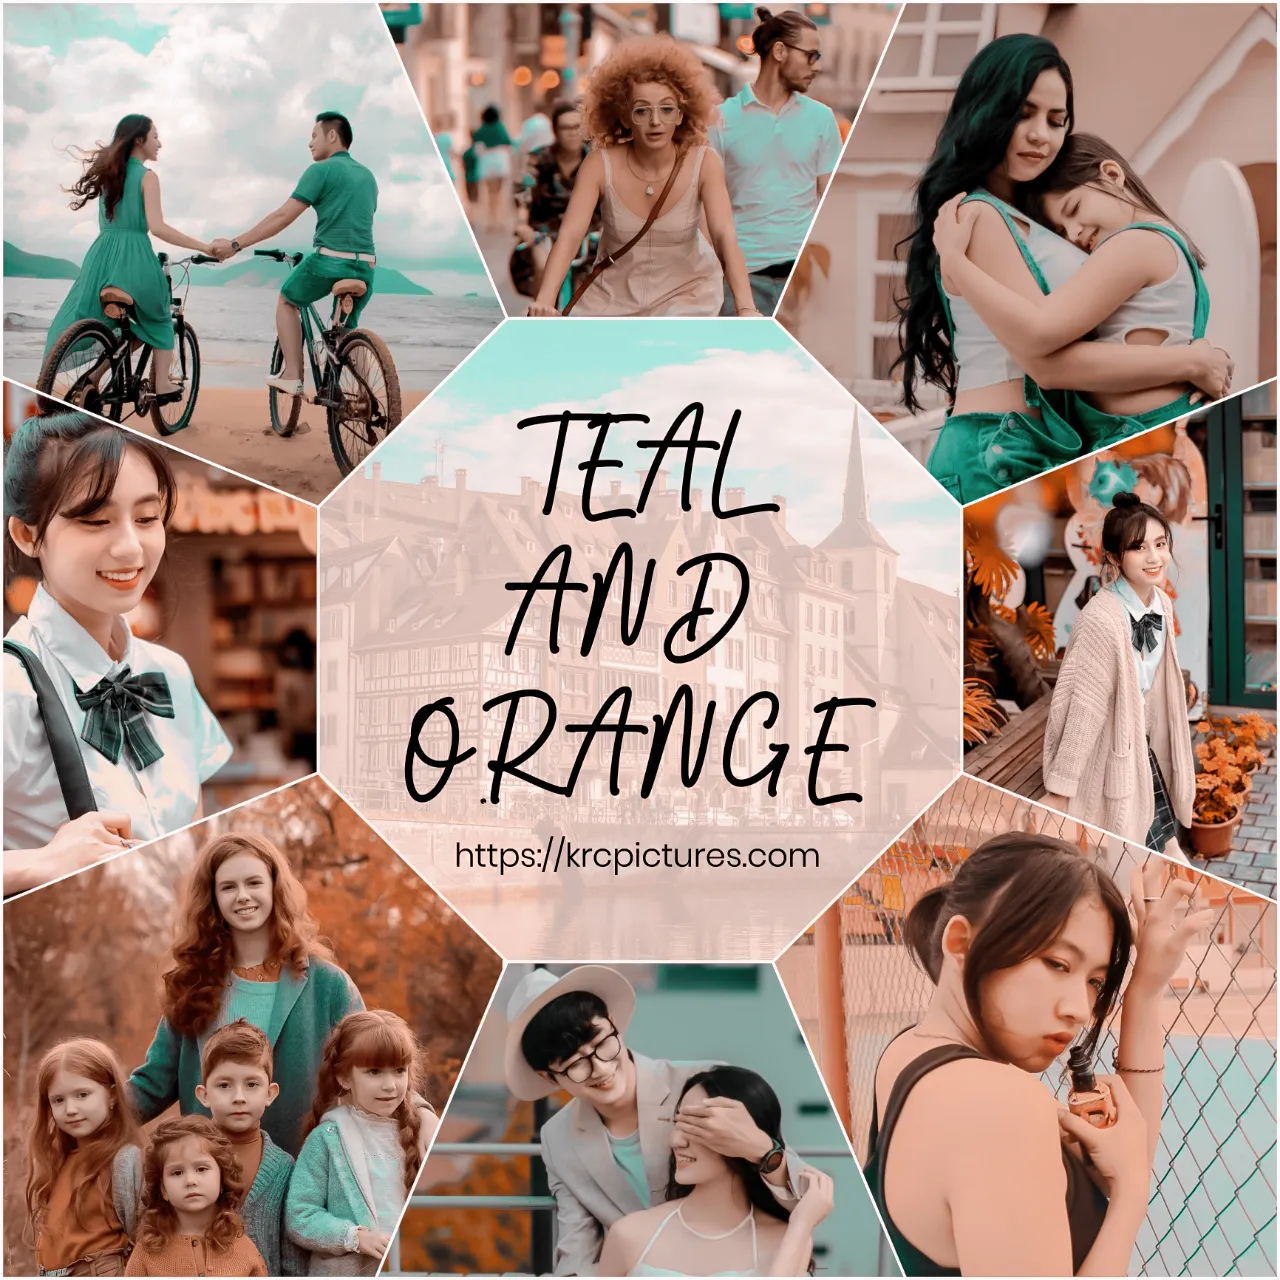 You are currently viewing Teal and orange preset